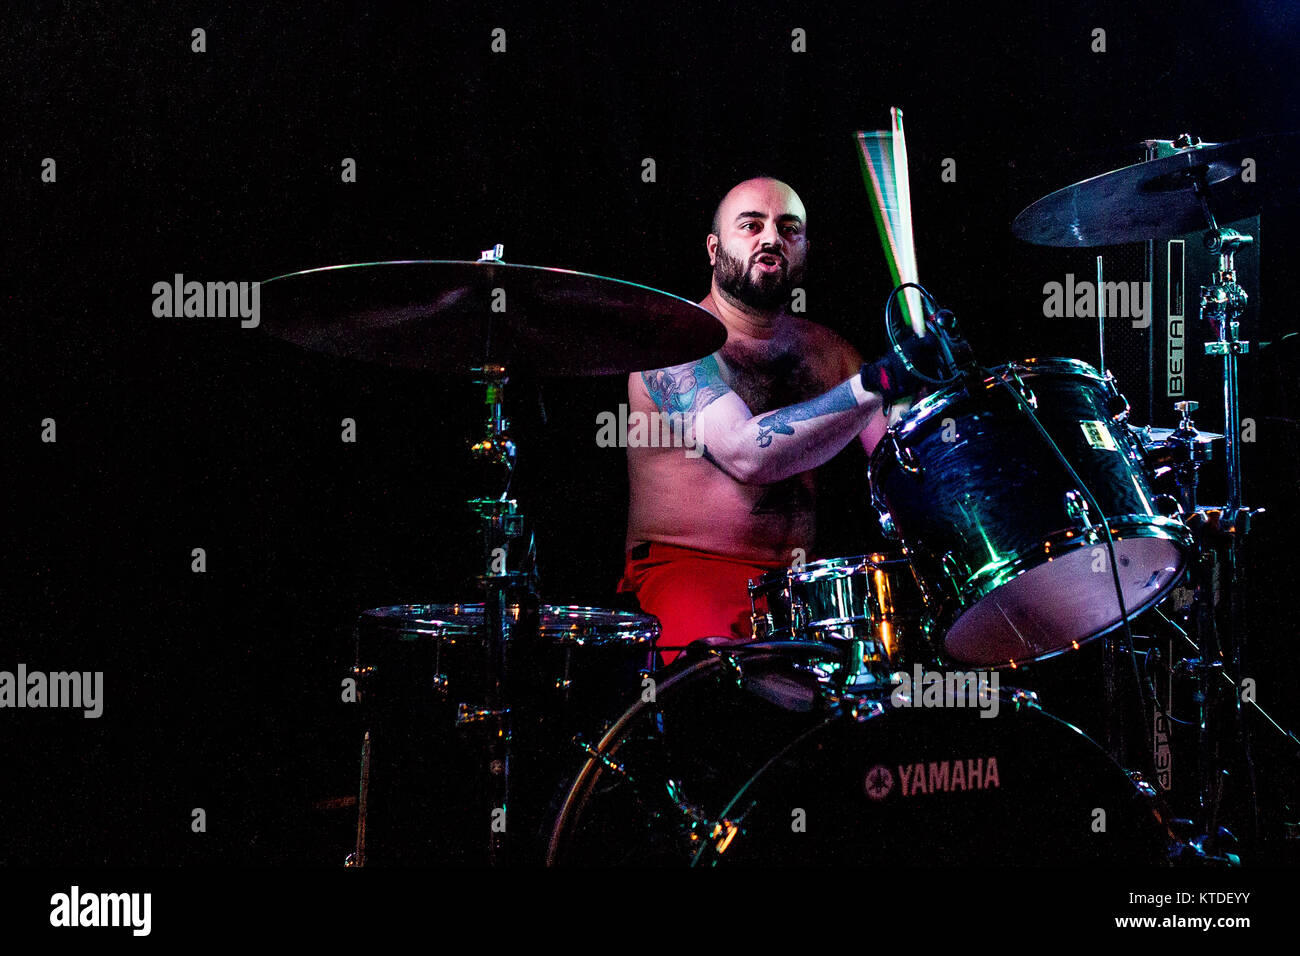 The American stoner and sludge metal band Torche performs a live concert at BETA in Copenhagen. Here drummer Rick Smith is seen live on stage. Denmark, 08/11 2015. Stock Photo